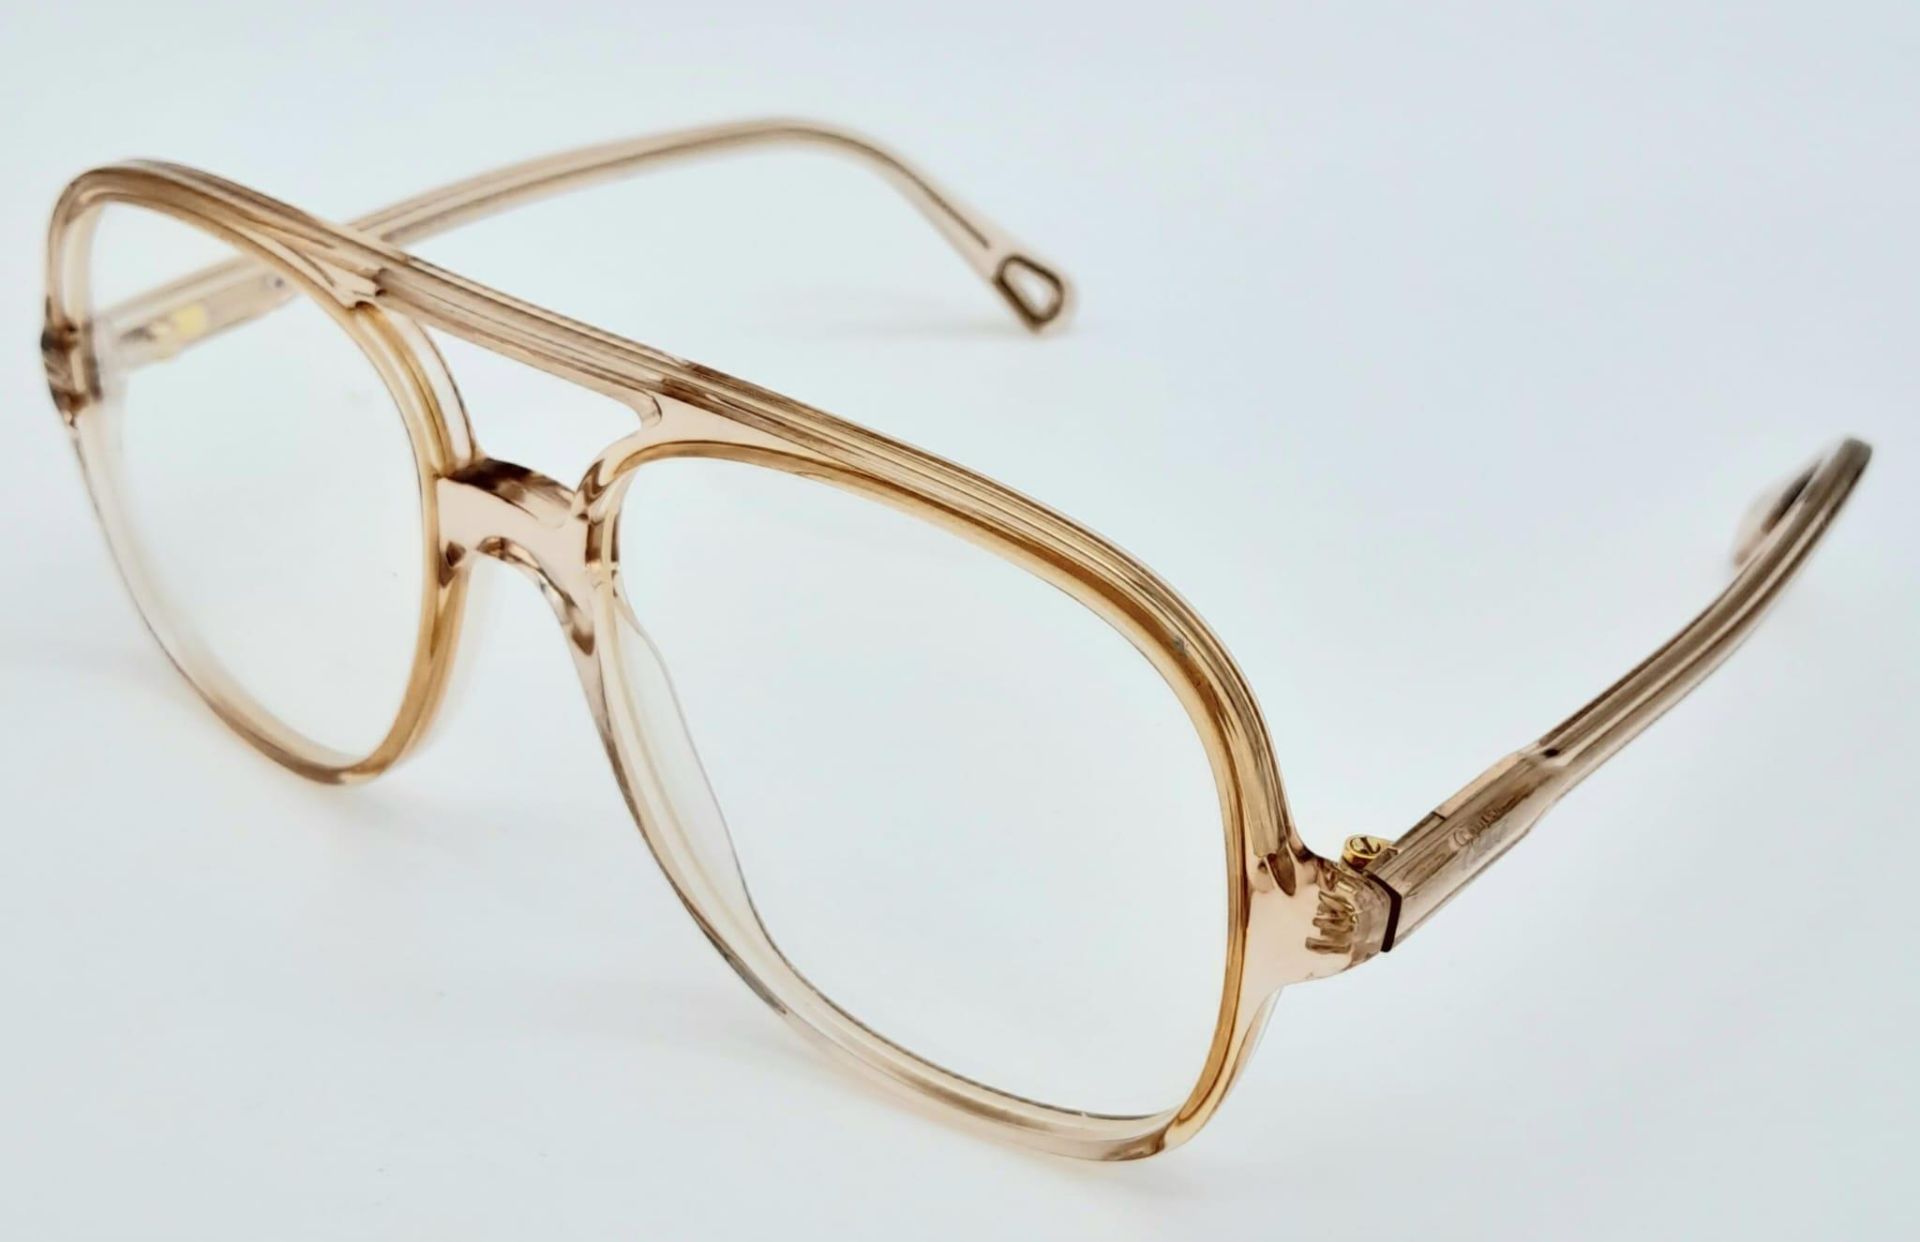 Chloe 'Patty' Eyeglasses. Large navigator shape/style and nude colour, Patty brings a 70s-inspired - Bild 2 aus 11